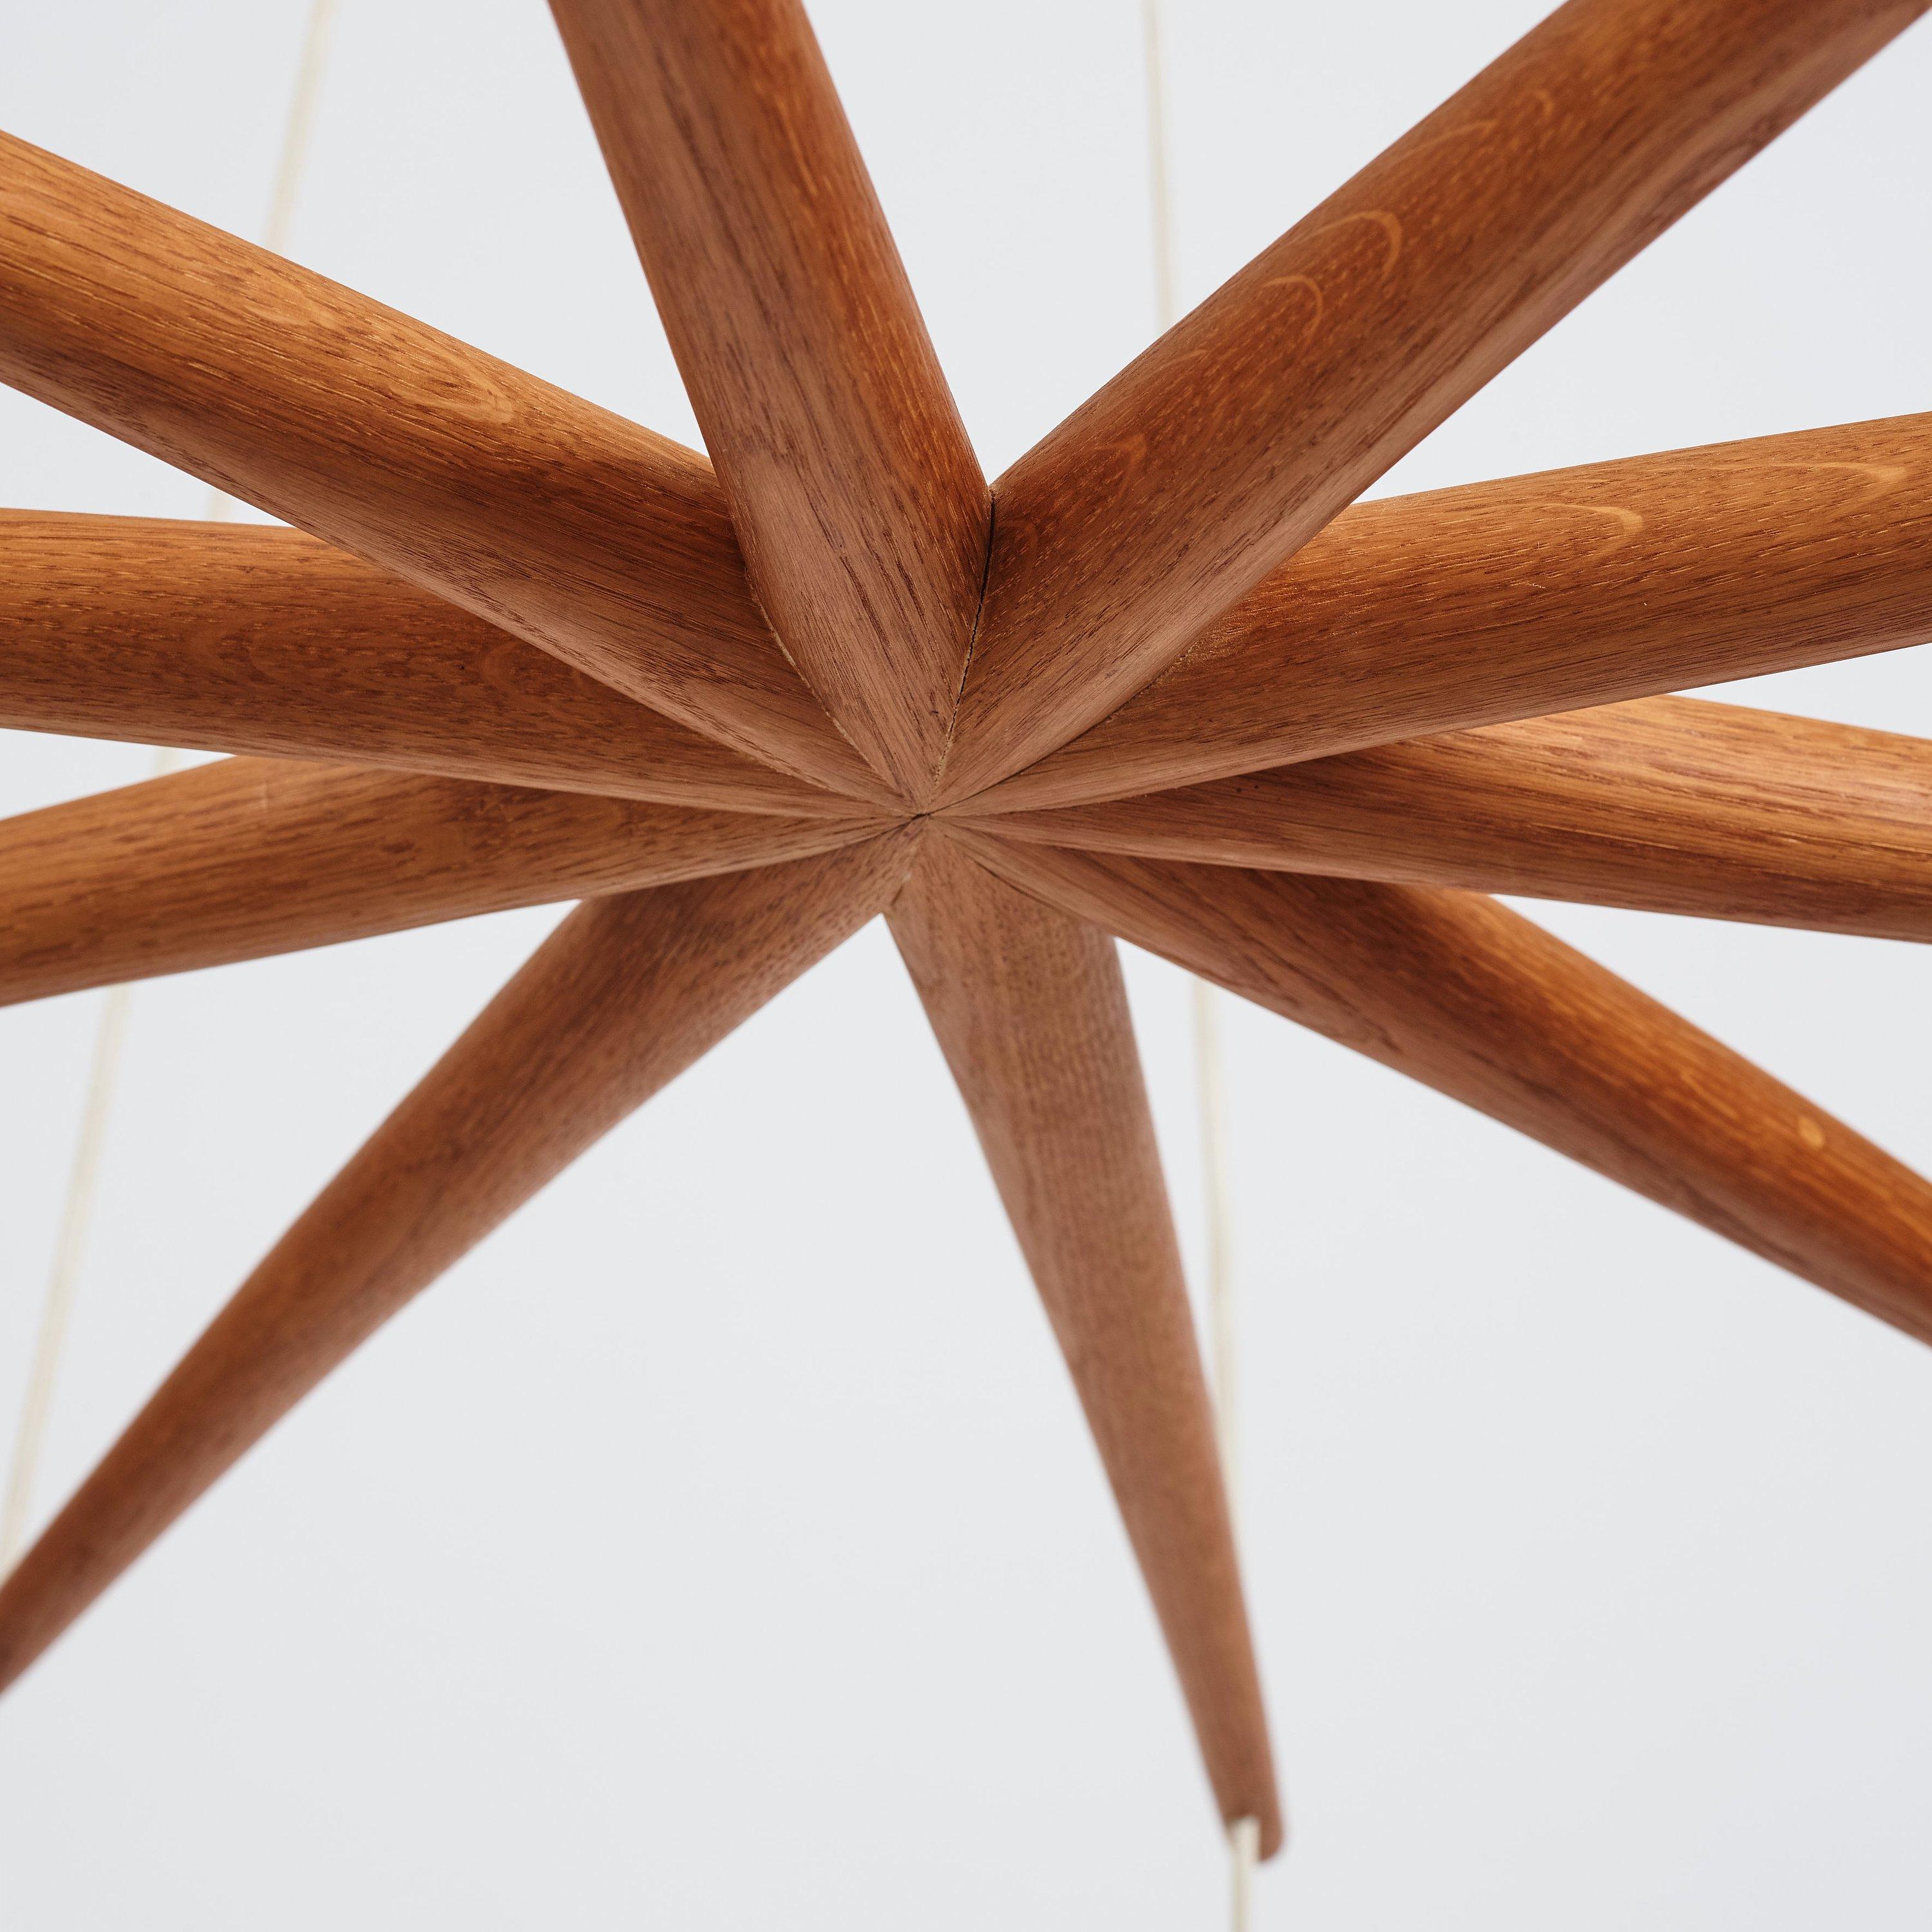 Ceiling Lamp Oak 10 Arm by Uno & Östen Kristiansson Luxus, Vittsjö, Sweden 1950s

This amazing Oak ceiling lamp consists of 10 arms in a large star pattern with 10 original opaline globes hanging below.

THis iconic ceiling lamp was created by